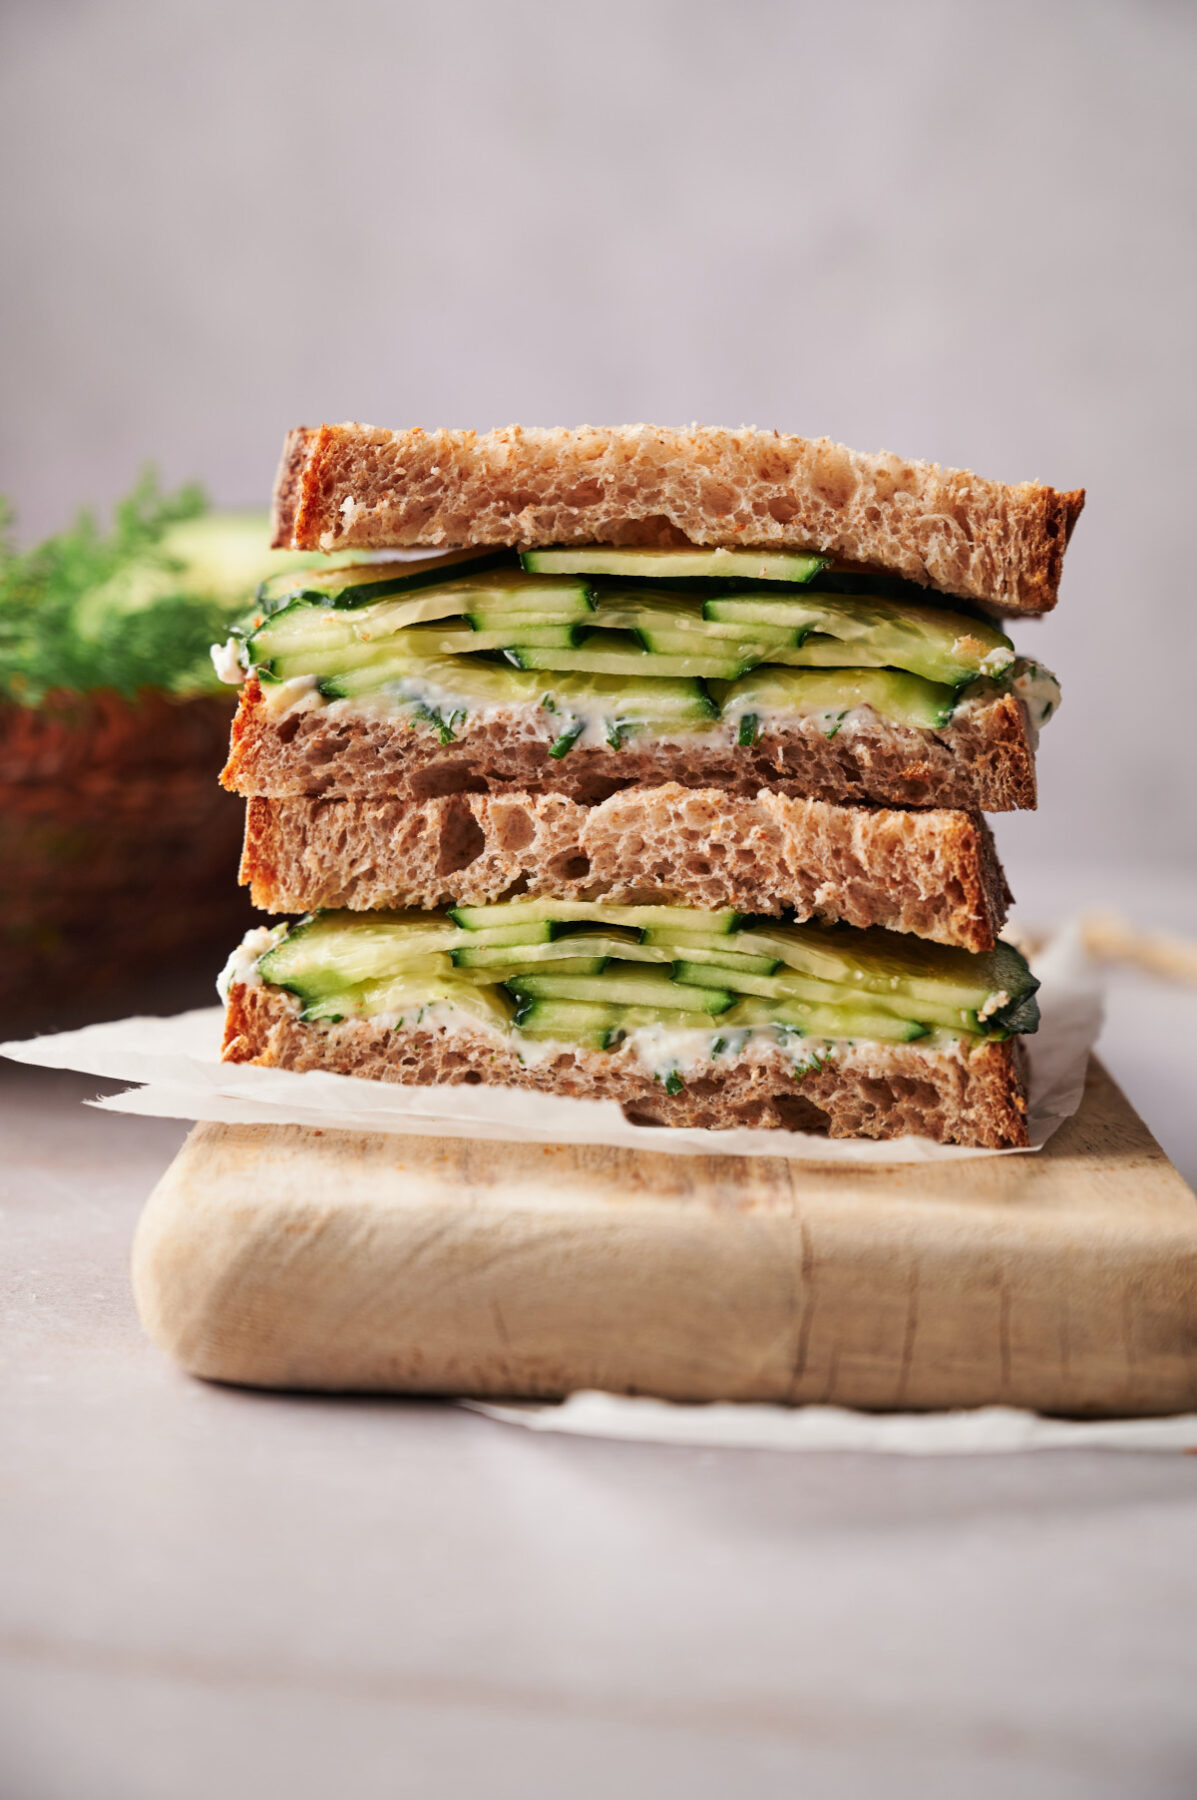 Vertical image of a cucumber sandwich sliced in half and stacked on a cutting board.